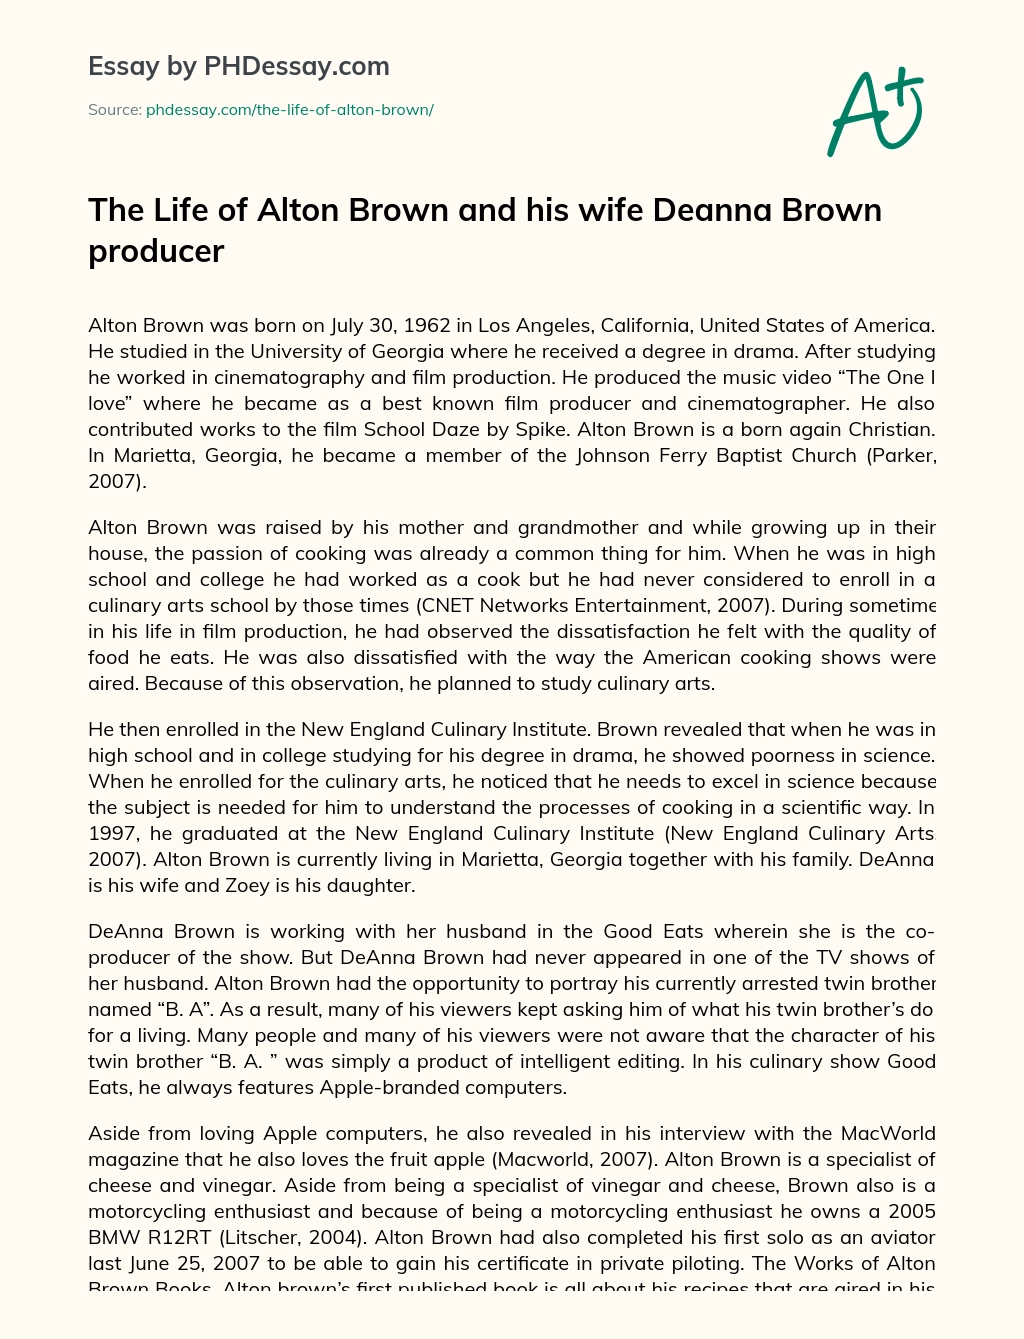 The Life of Alton Brown and his wife Deanna Brown producer essay